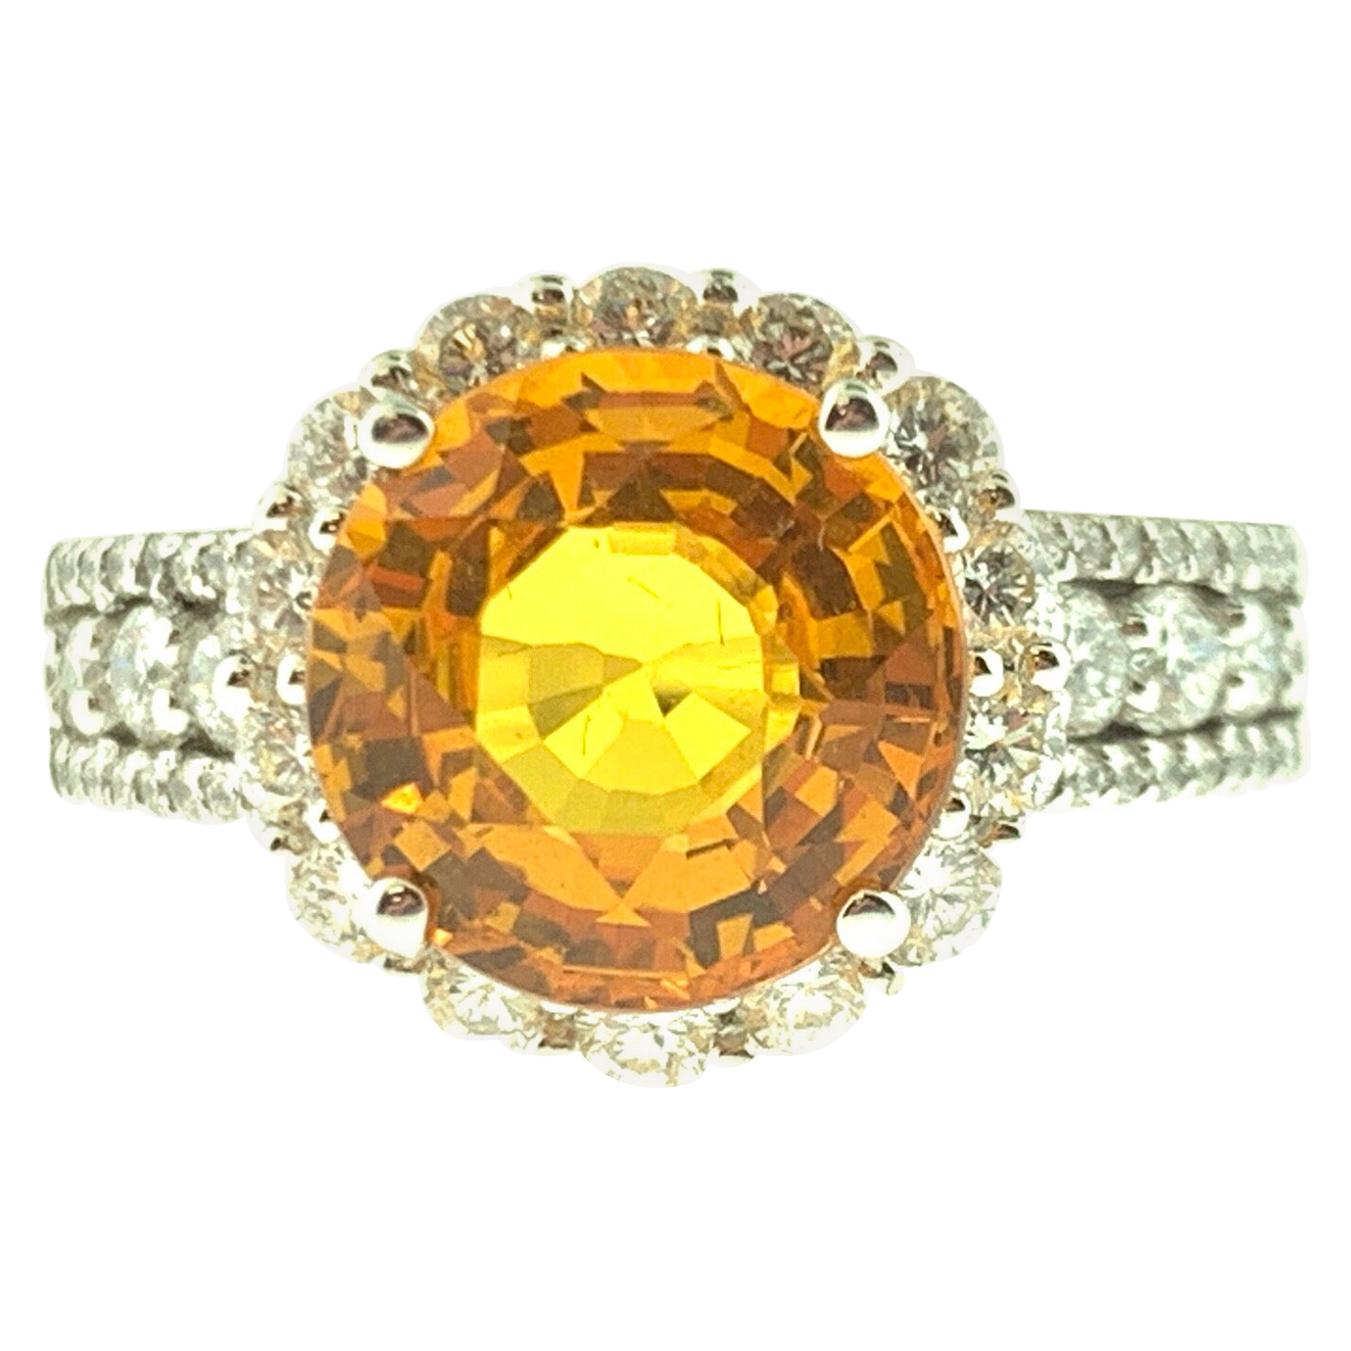 4.08 Carat Yellow Sapphire and Diamond Cocktail Ring